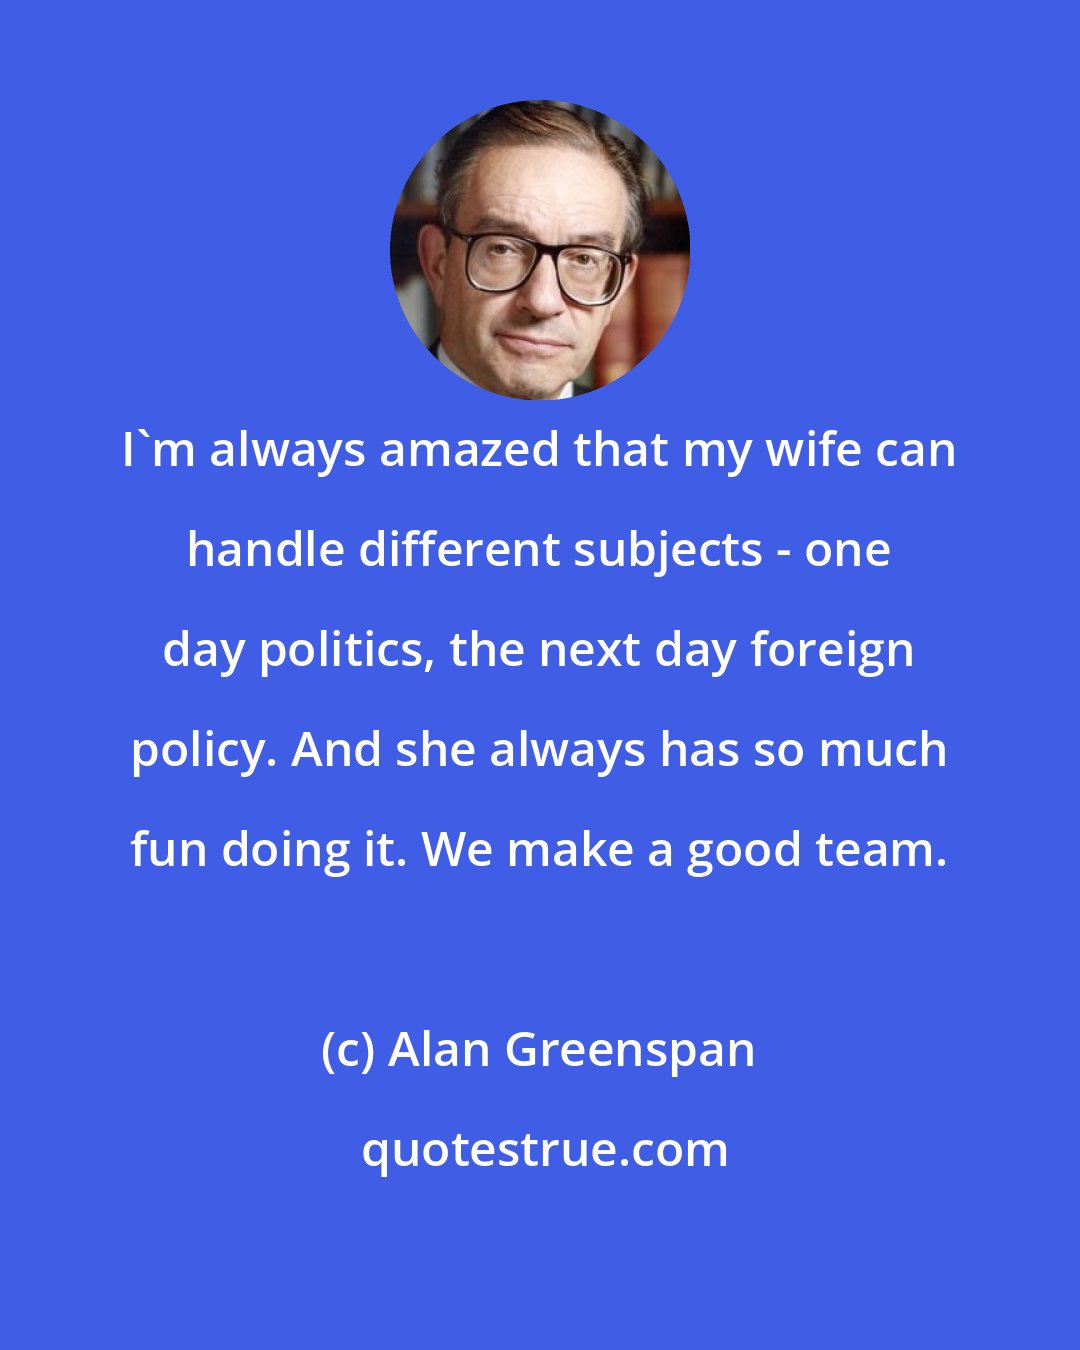 Alan Greenspan: I'm always amazed that my wife can handle different subjects - one day politics, the next day foreign policy. And she always has so much fun doing it. We make a good team.